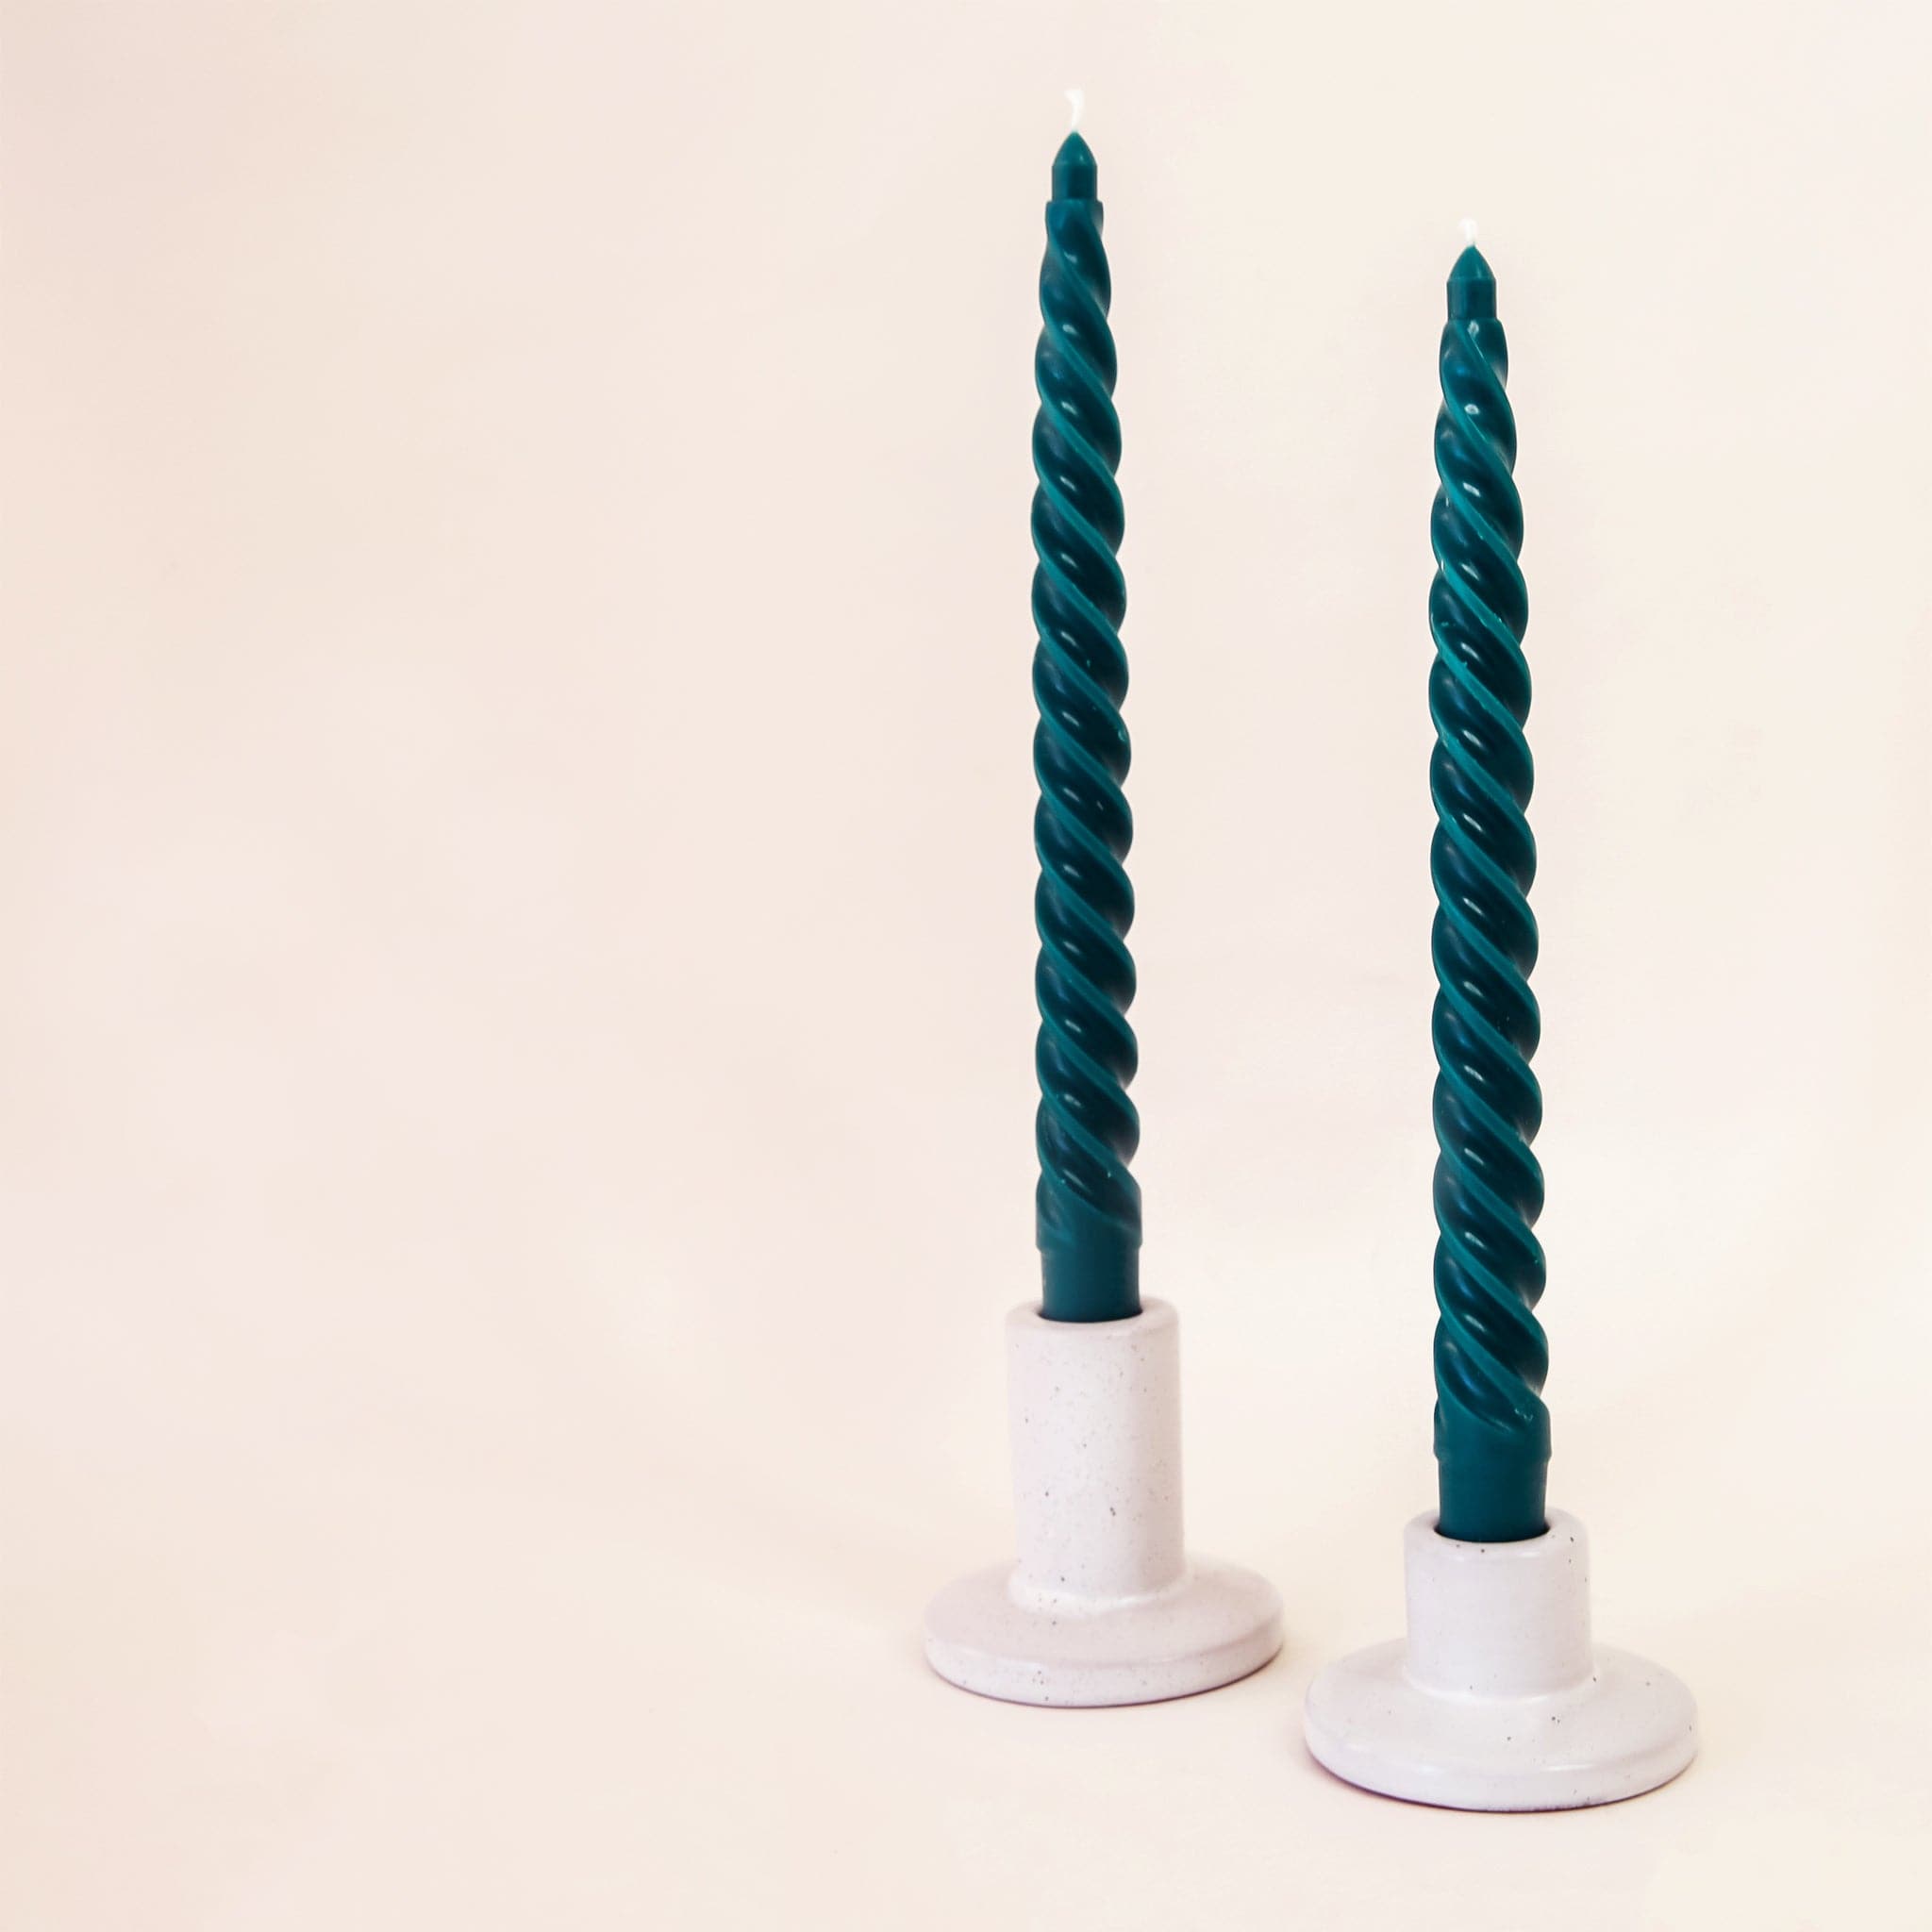 Against a white background are two gray, ceramic candle holders. The candle holder on the left has a round base and tall, cylinder holder. The holder on the left also has a round base but the cylinder holder is about half the size of the other holder. Both holders have a dark green, twisted taper candle inside. 